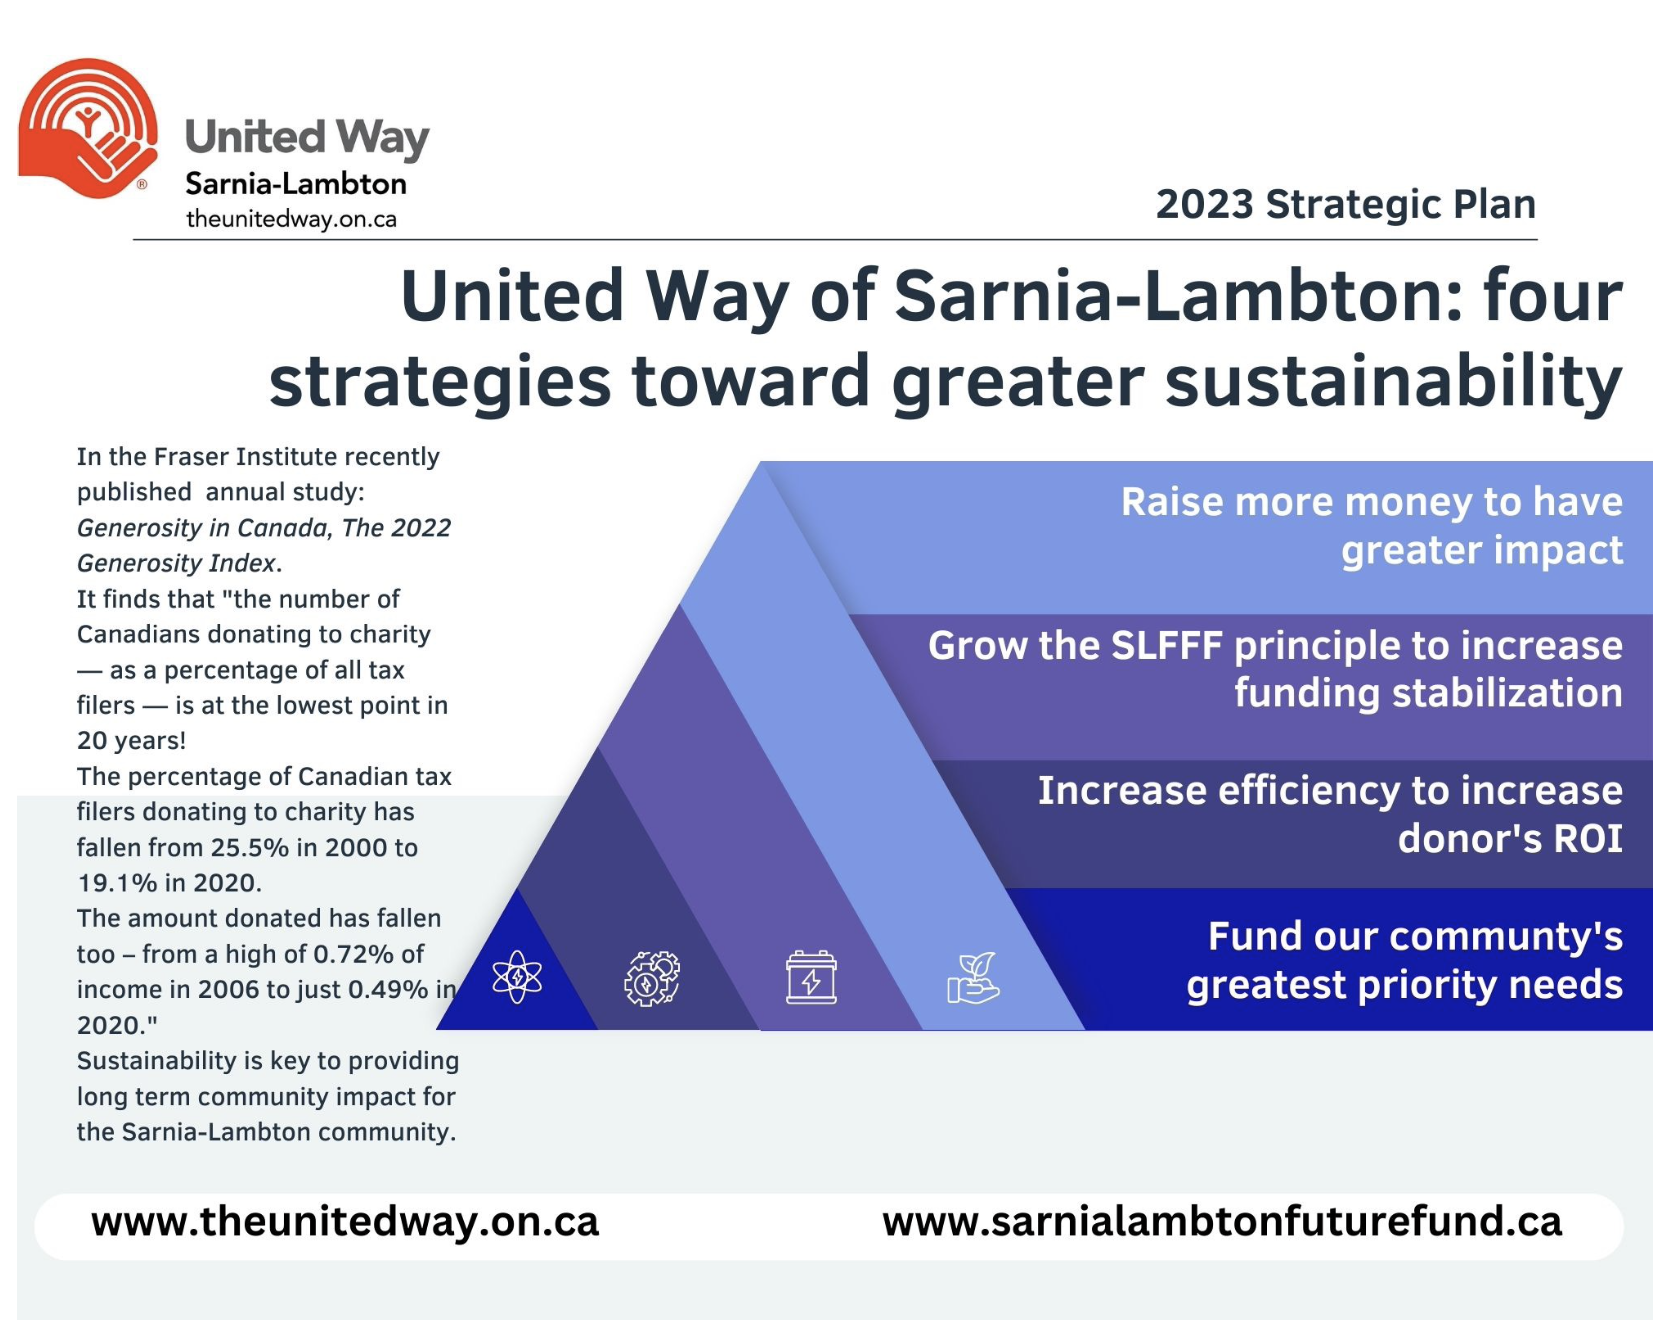 Photo of the top page of the United Way of Sarnia-Lambotn April 13, 2023 Long Range Plan report.